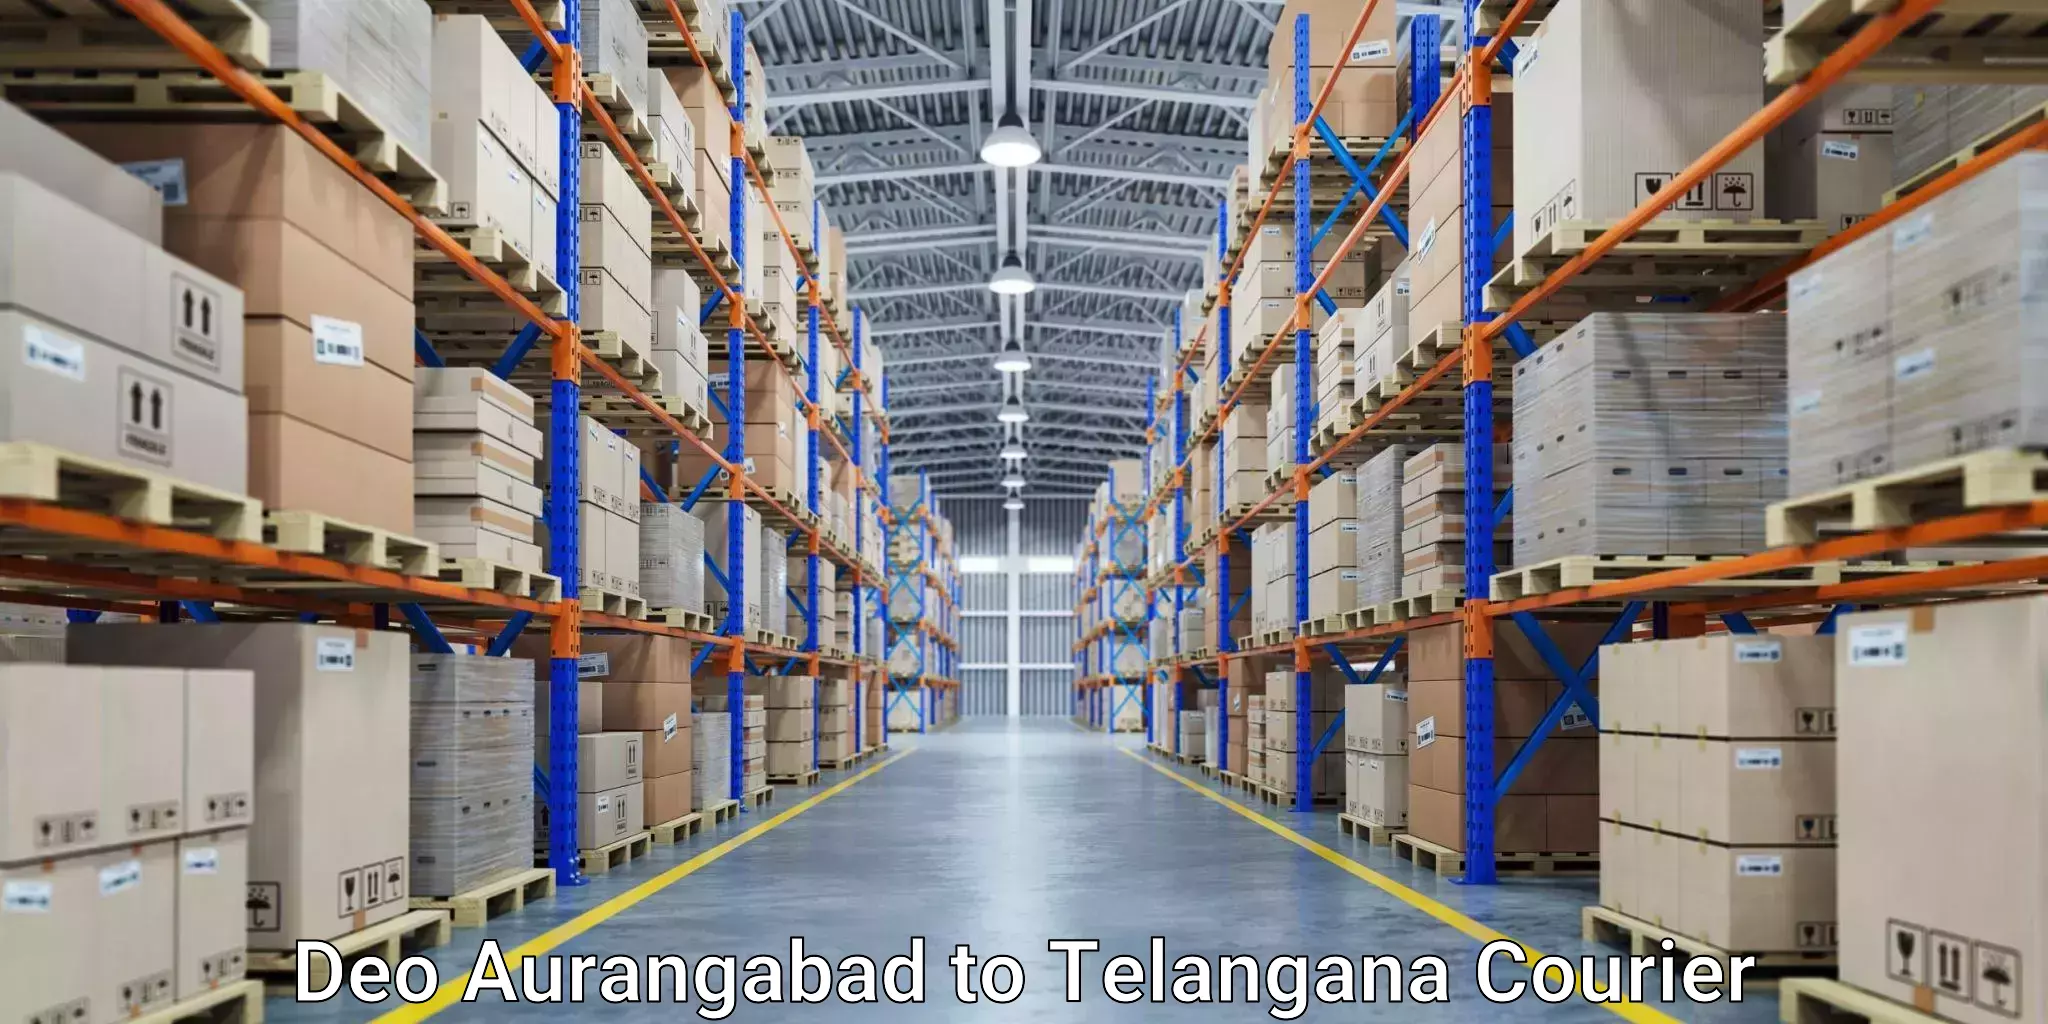 Specialized courier services Deo Aurangabad to Madhavaram